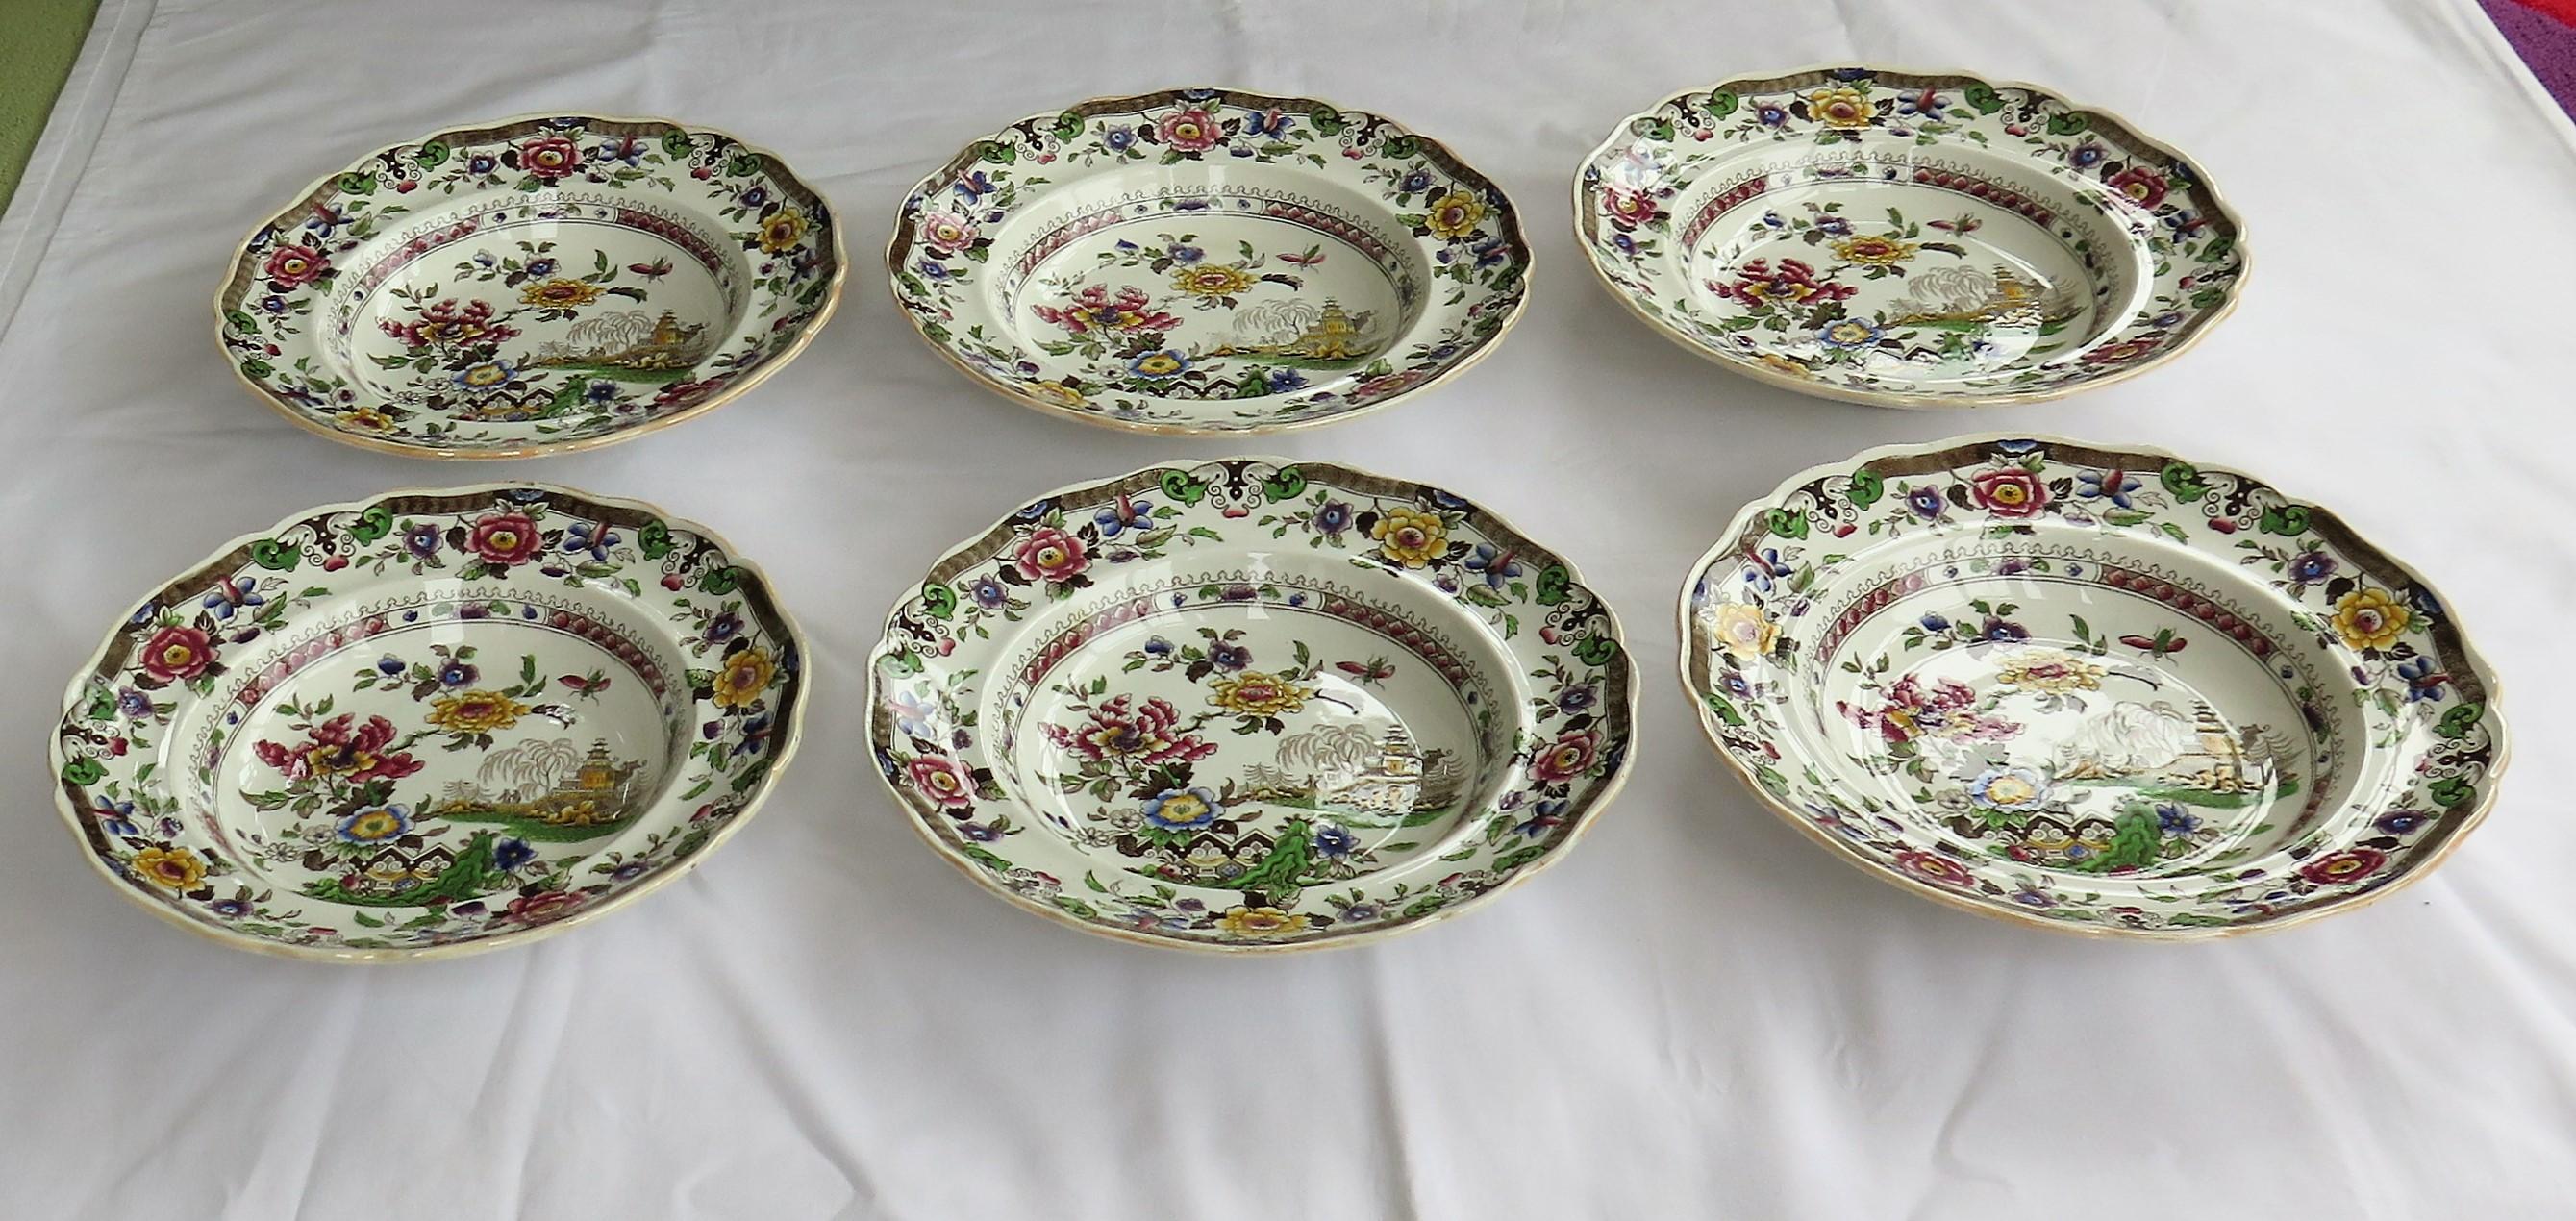 Chinoiserie SIX Pottery Soup Bowls or Plates by Zachariah Boyle Chinese Flora Pattern